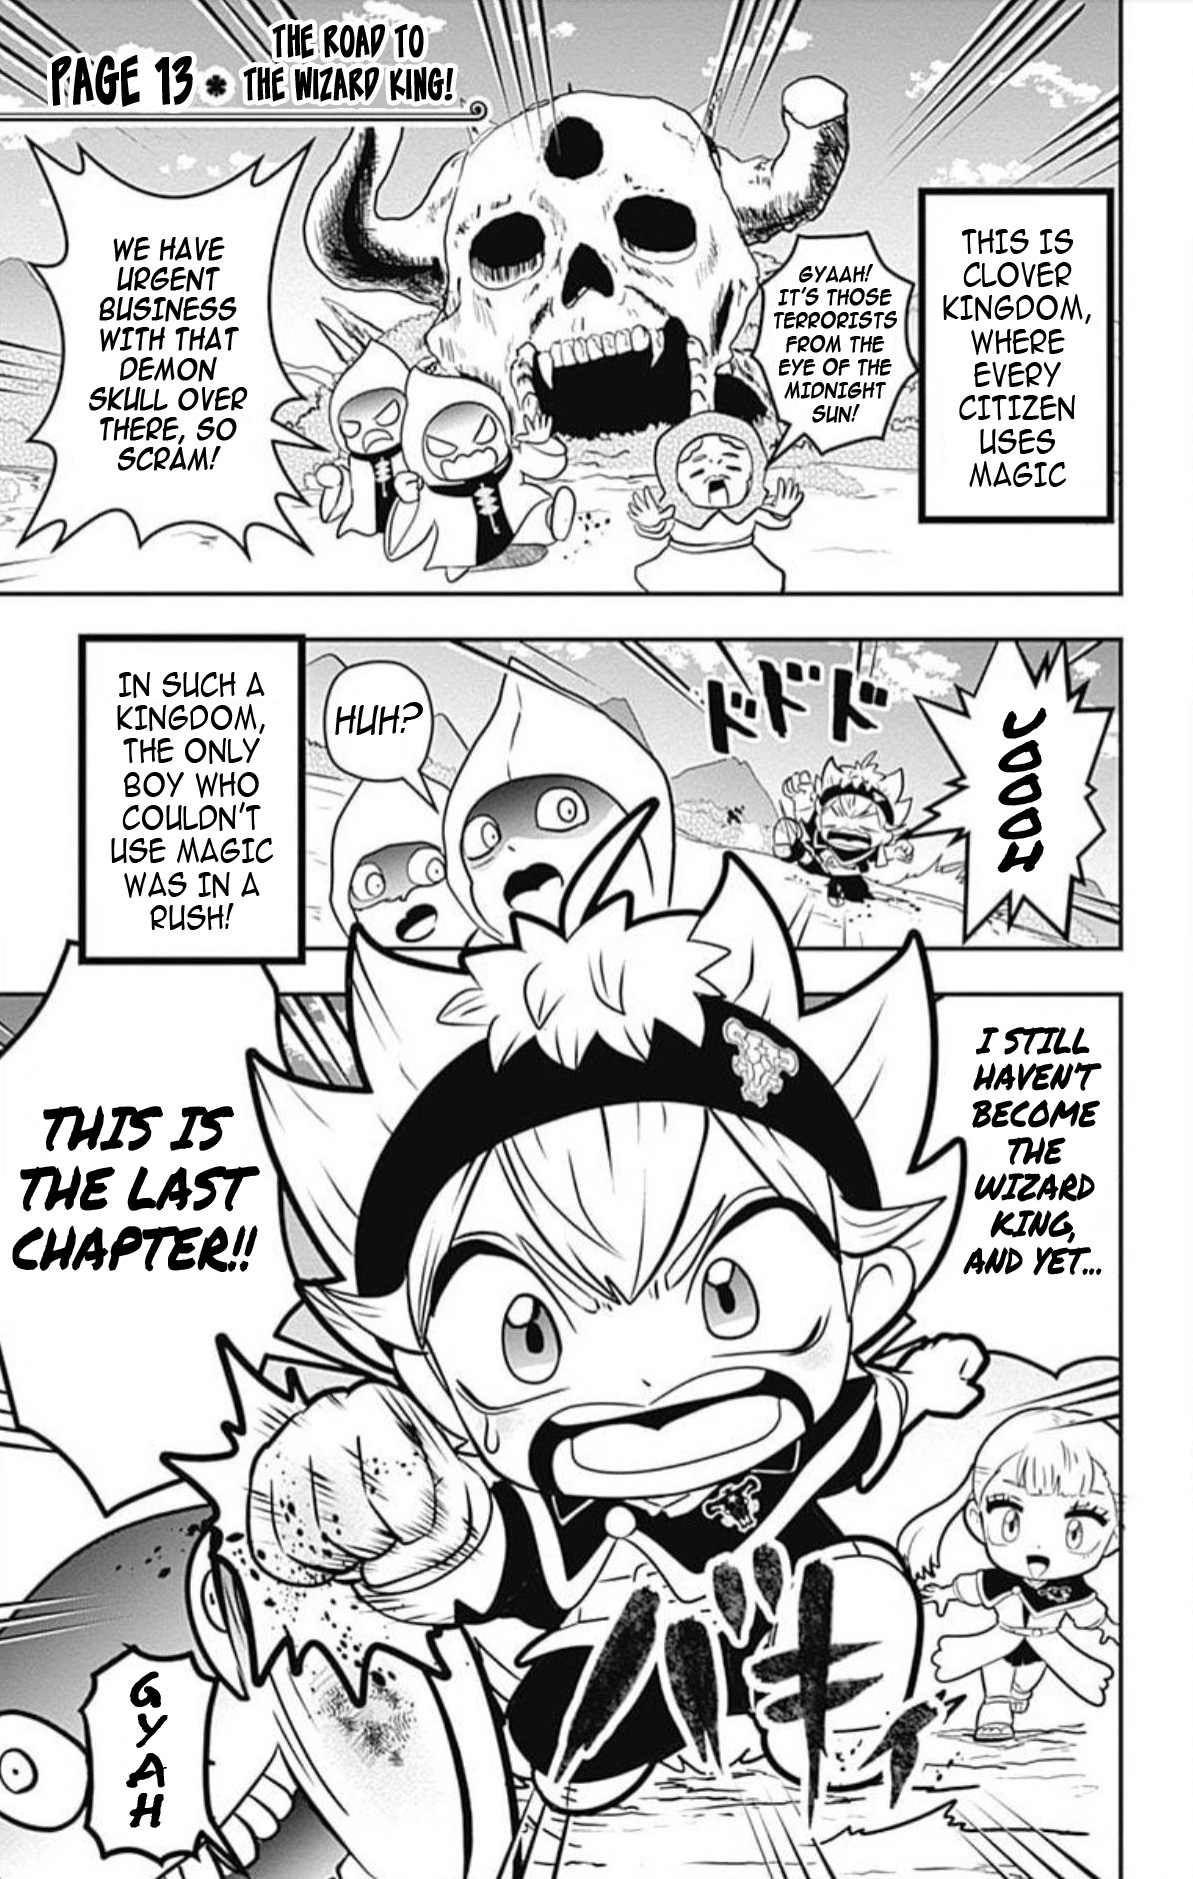 Black Clover Sd - Asta's Road To The Wizard King Vol.3 Chapter 13: The Road To The Wizard King! - Picture 1